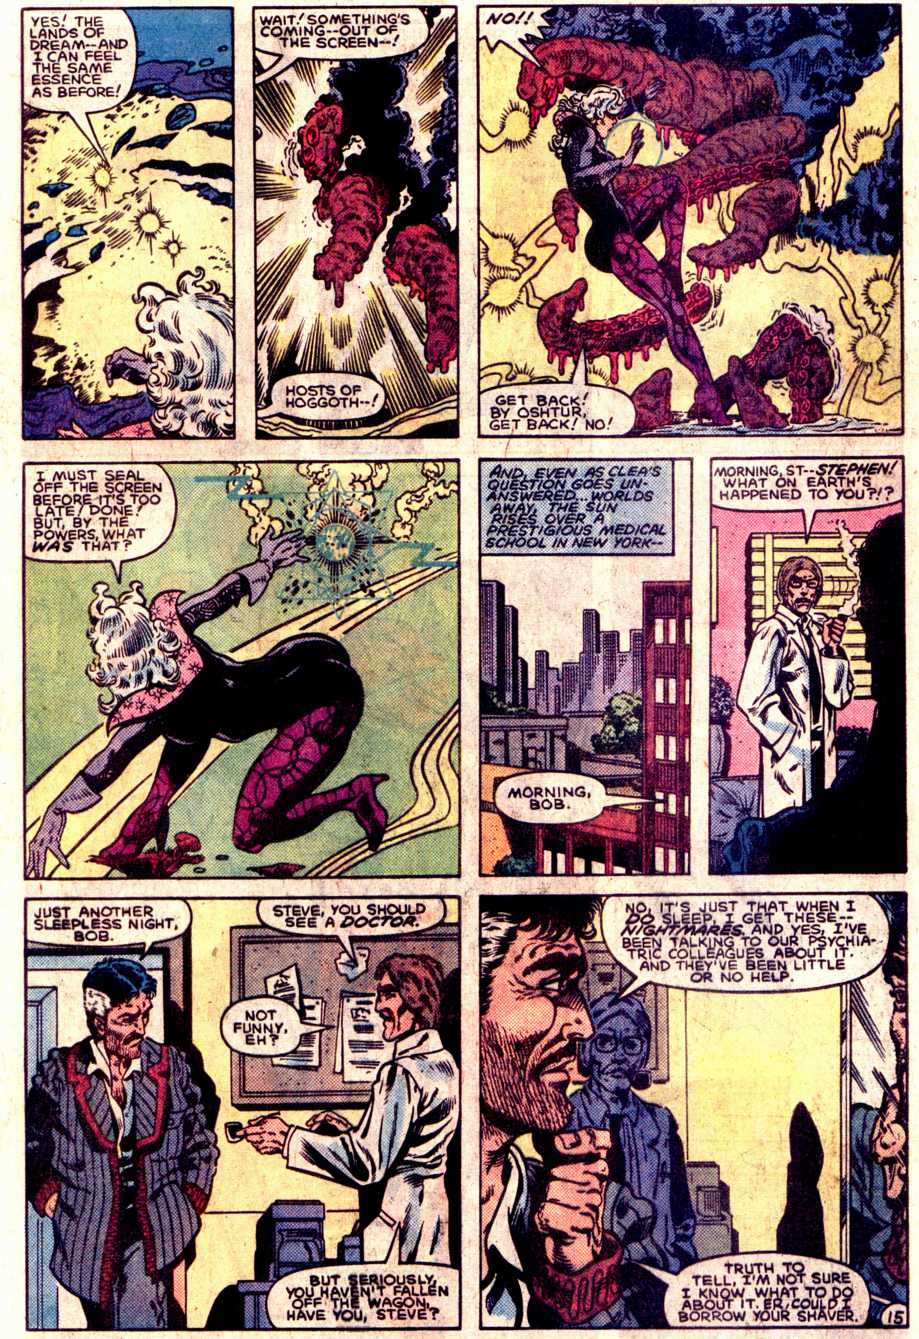 What If? (1977) issue 40 - Dr Strange had not become master of The mystic arts - Page 16